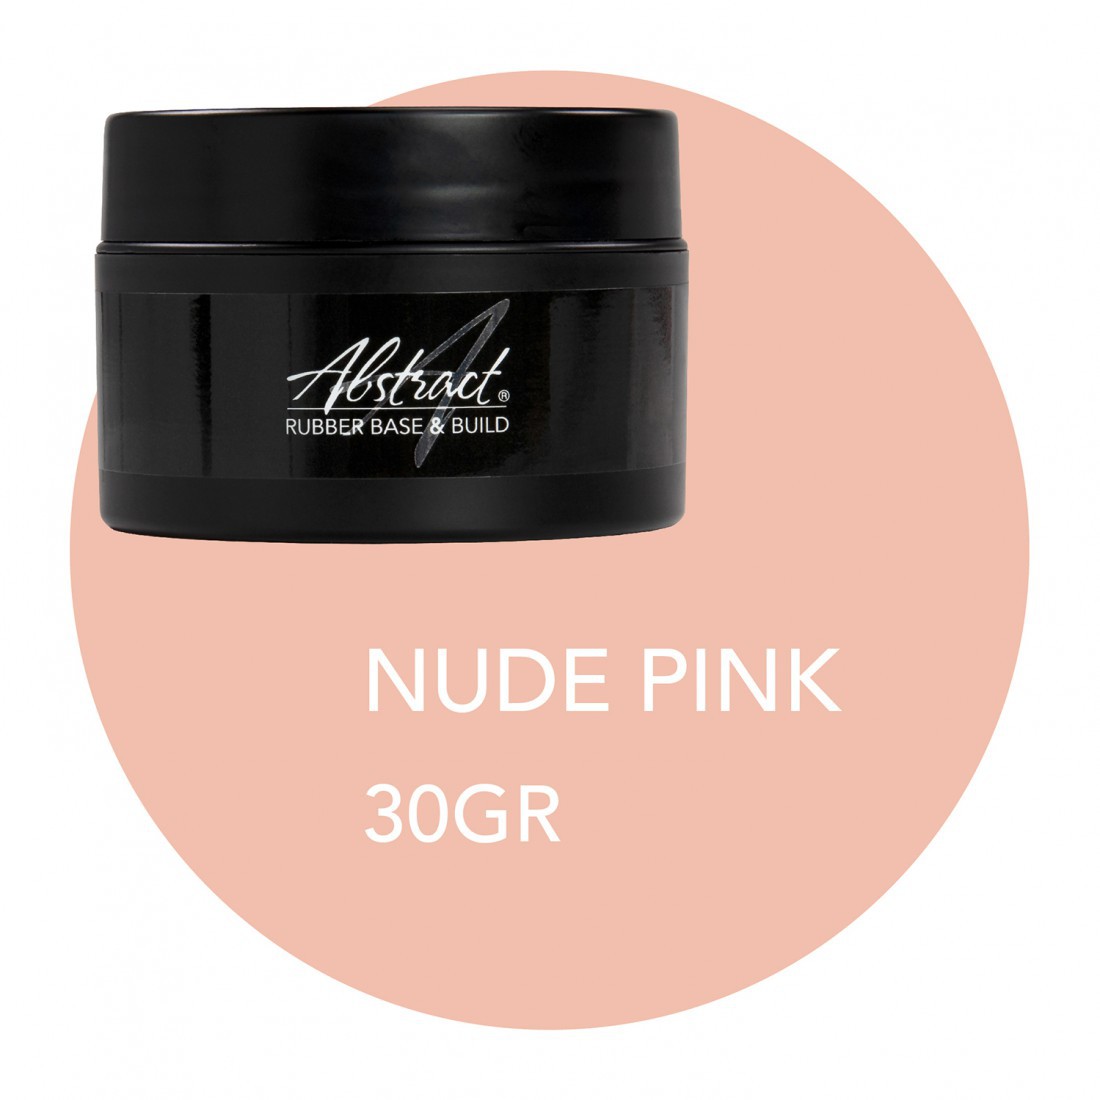 Nude Pink Rubber Base & Build Gel 30 ml Abstract